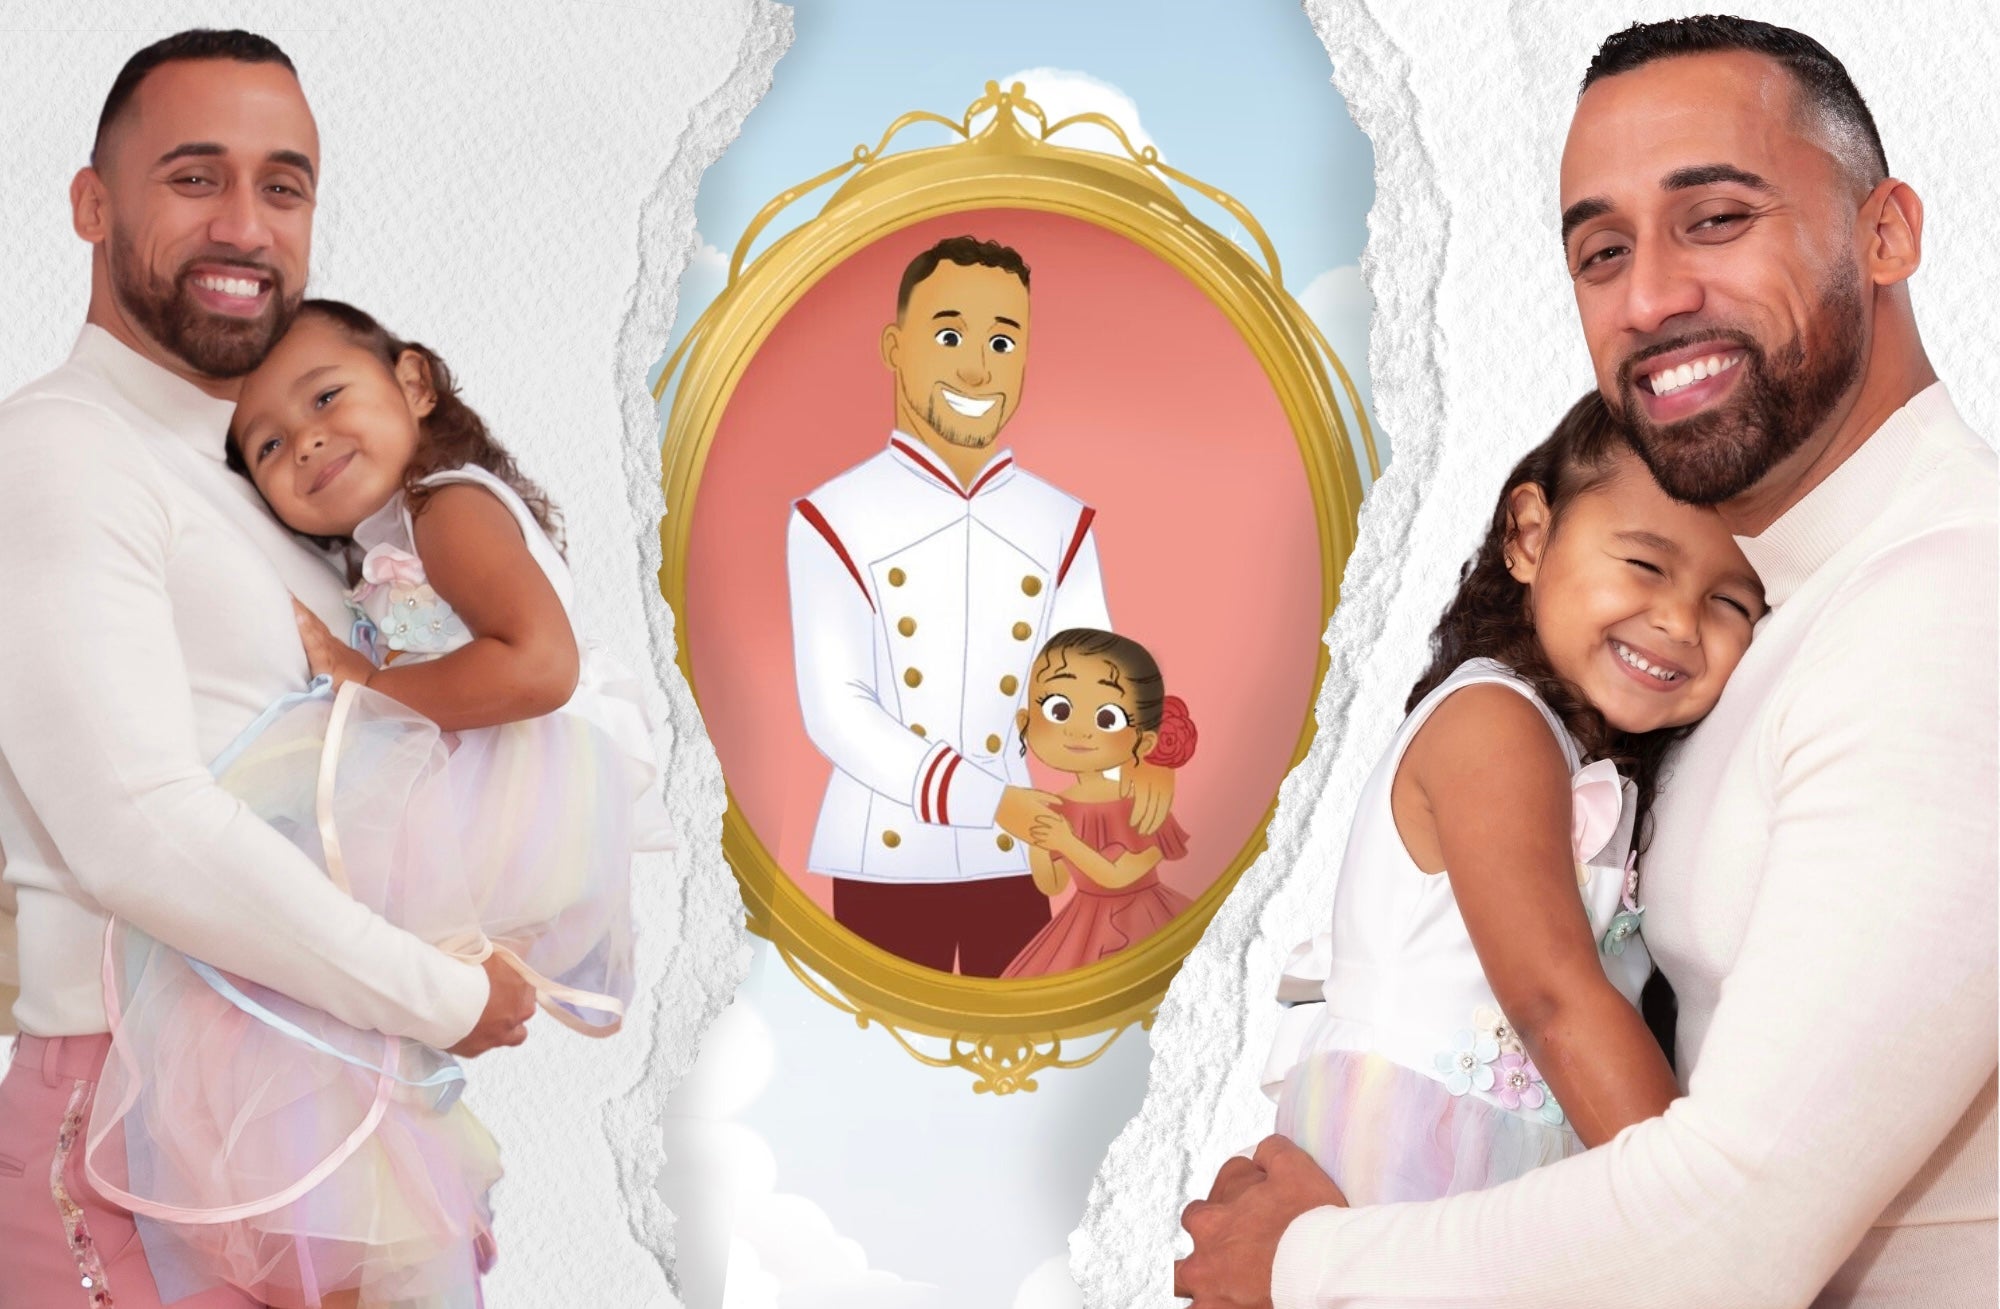 A New Story For A New Generation: A Single Dad’s Mission To Change The Fairytale Narrative